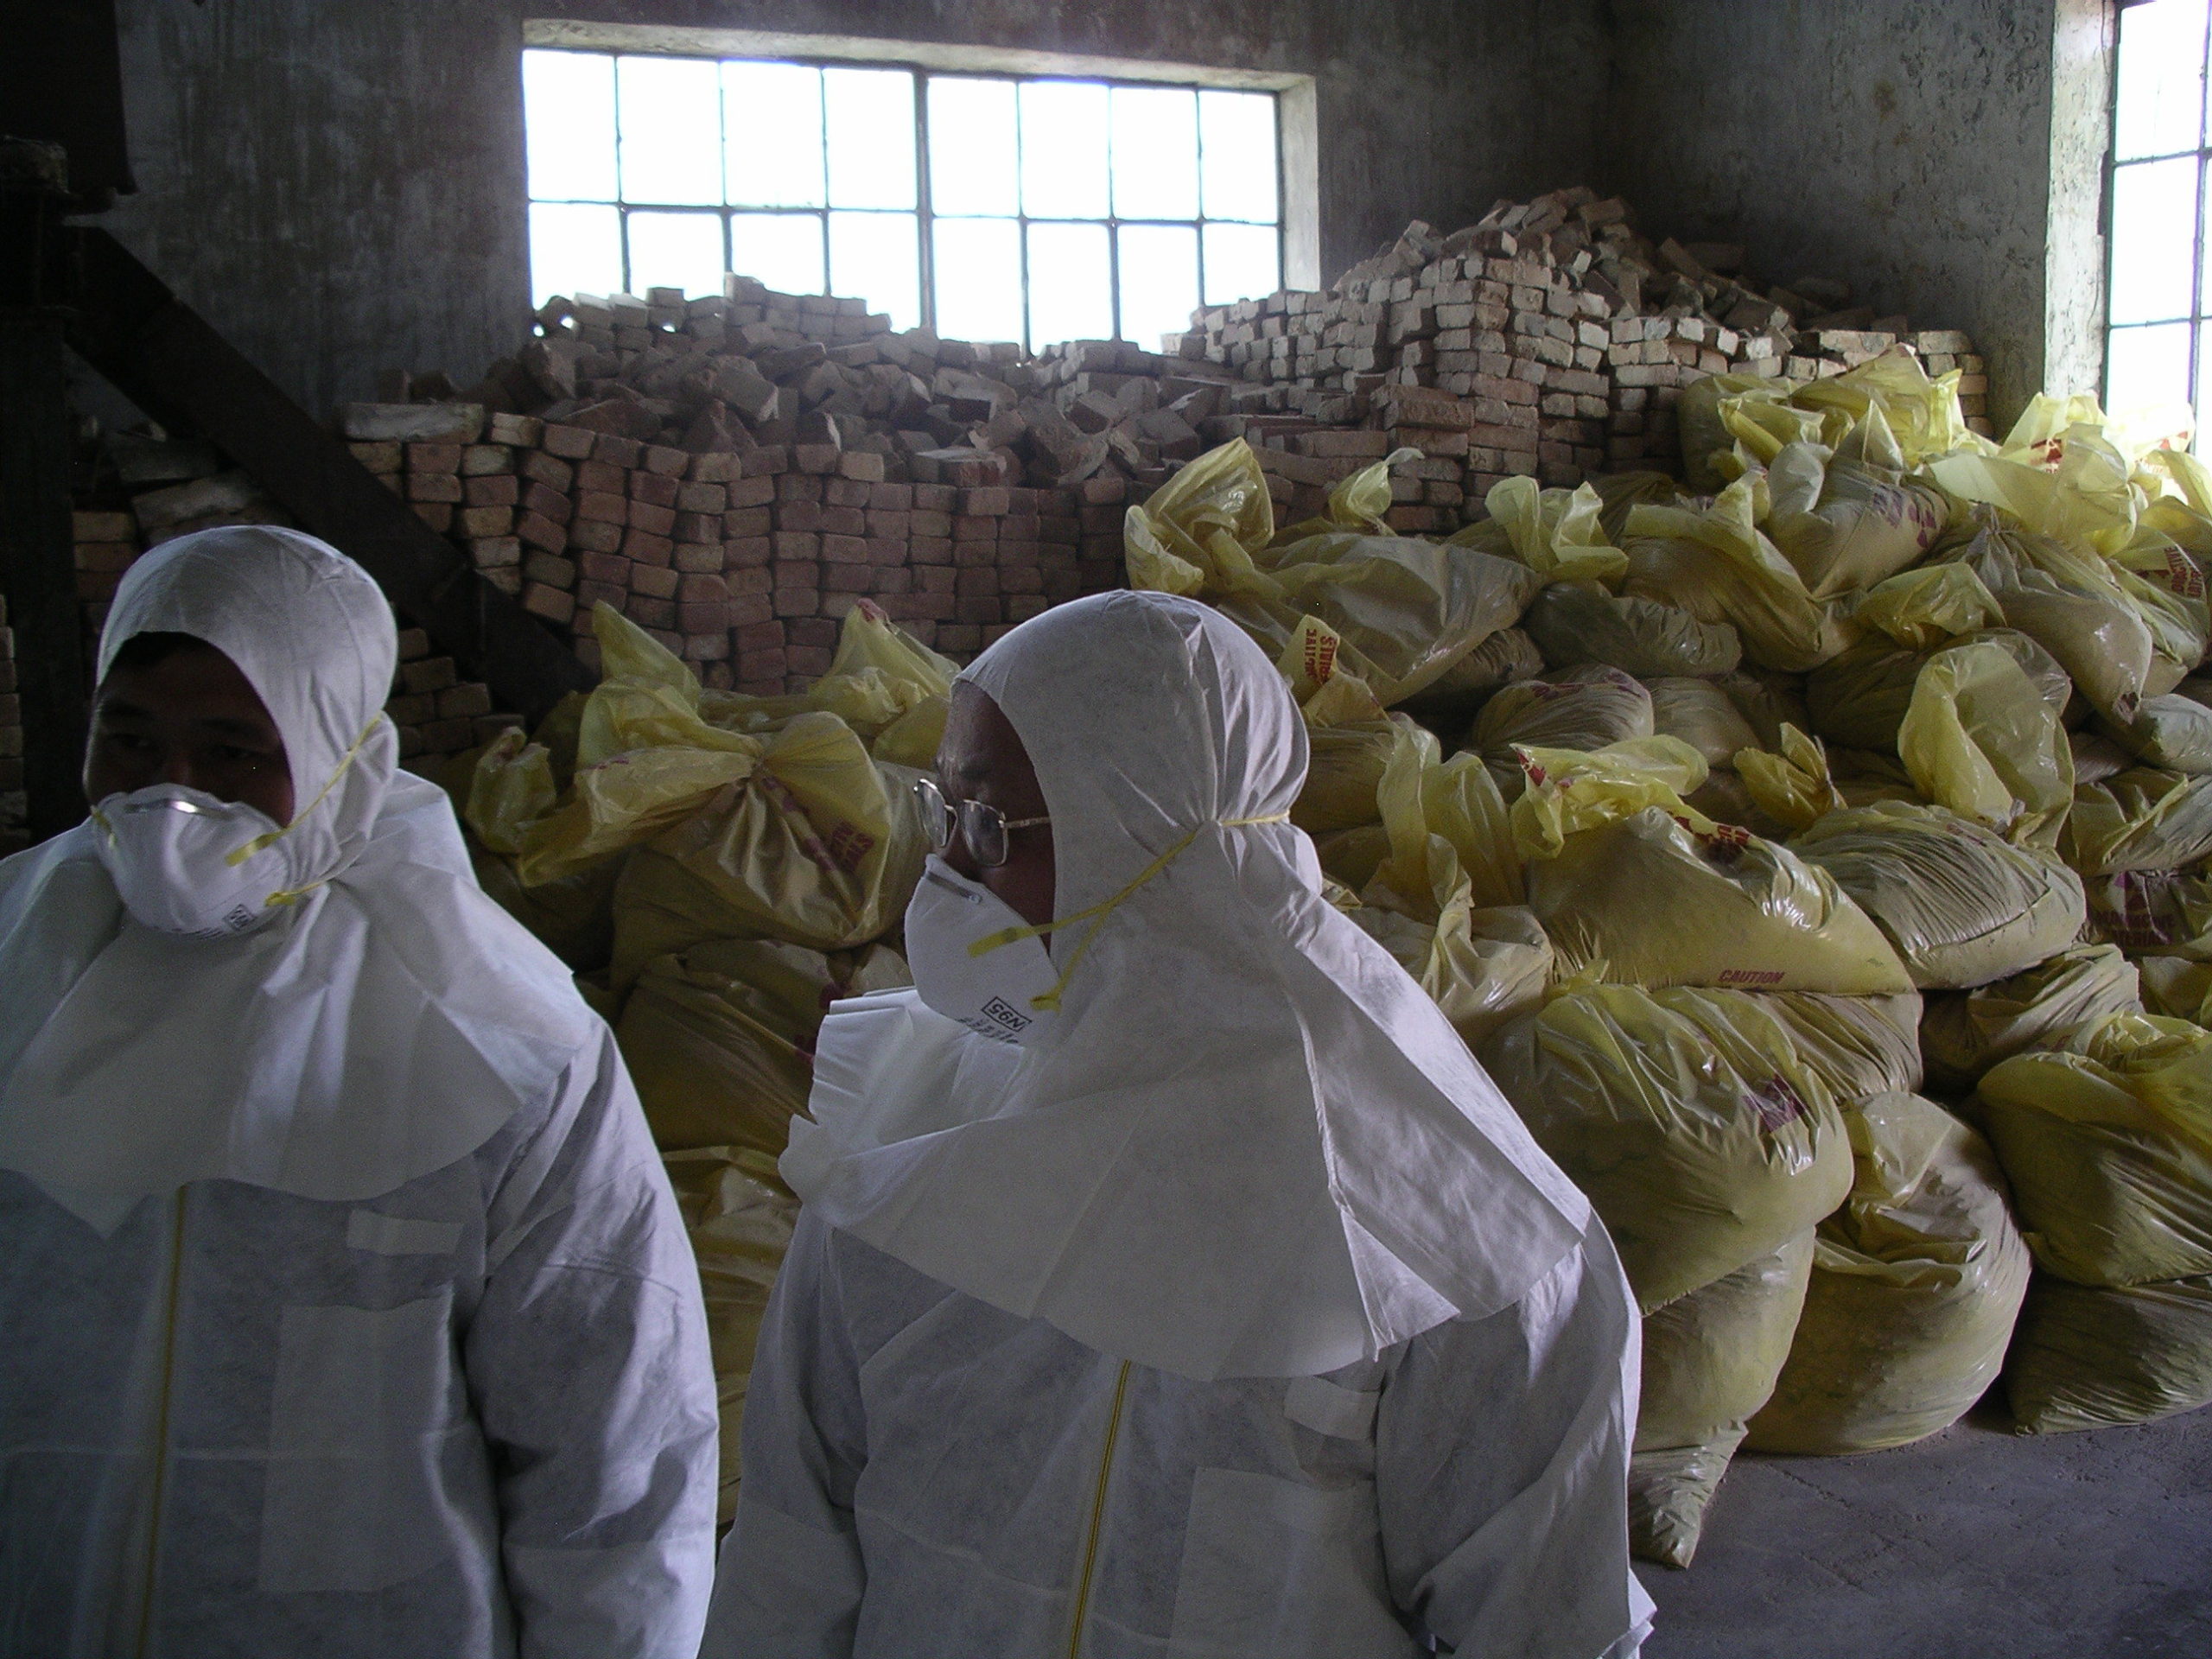 Two men in protective white suits and respirators with heaps of plastic bags and staked bricks in the back